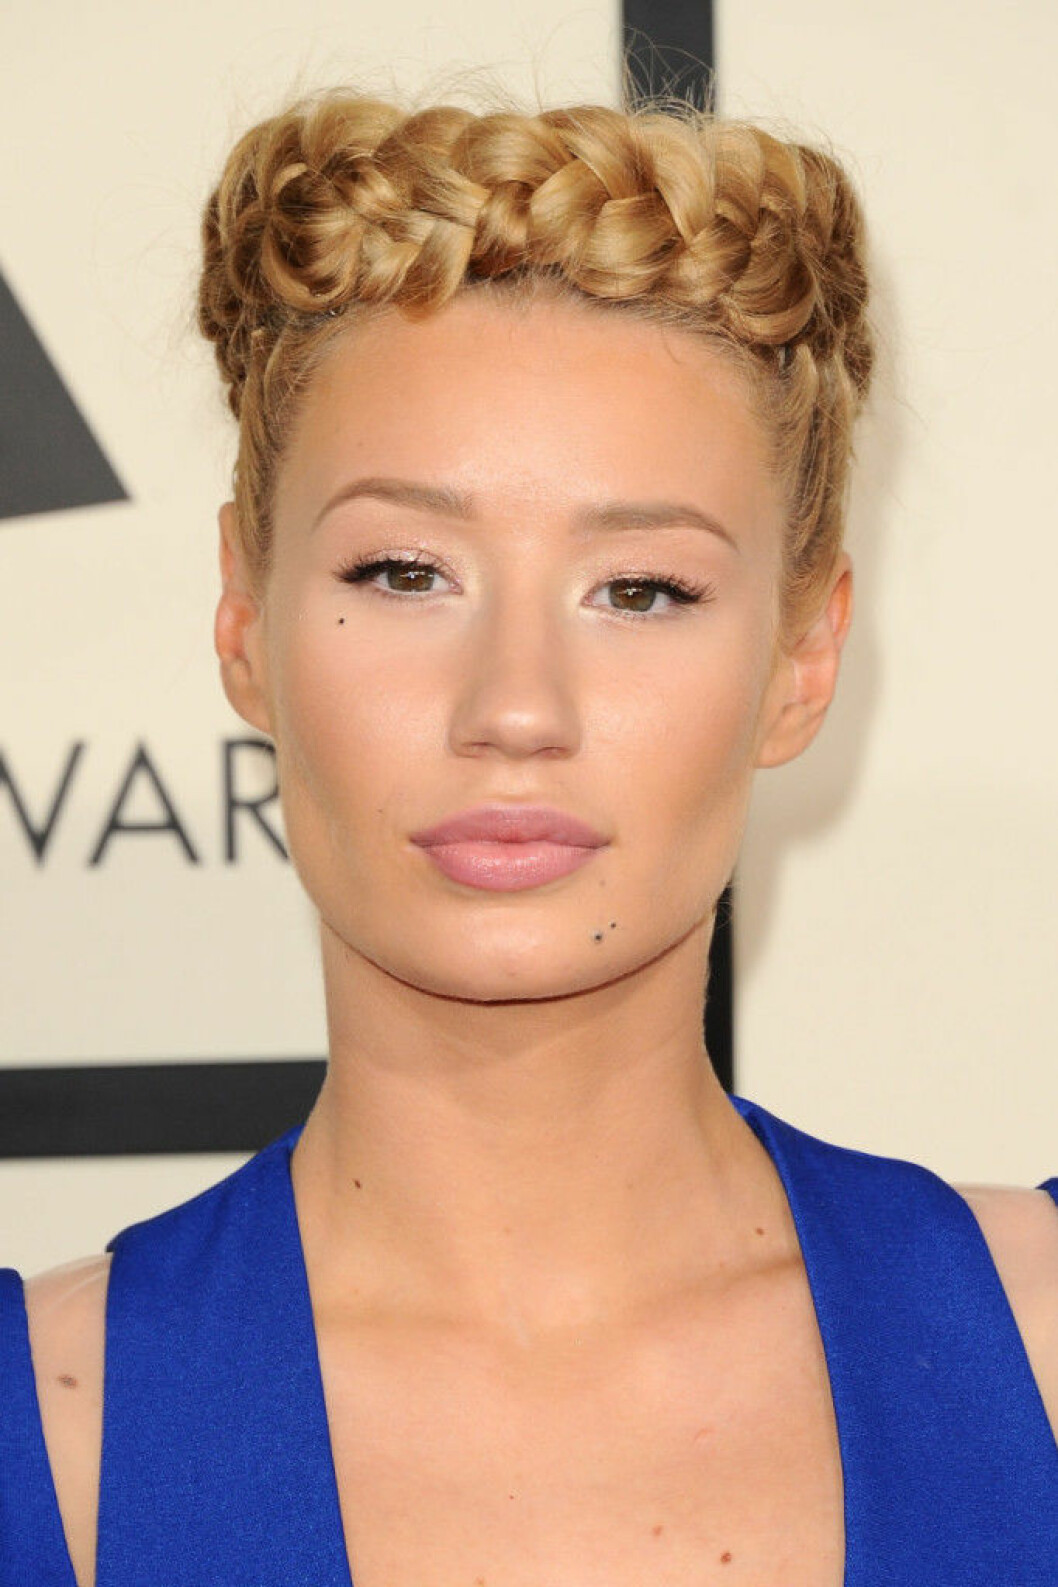 , Los Angeles, CA - 1/15/2015 - The 57th Annual GRAMMY Awards - Arrivals at Staples Center. -PICTURED: Iggy Azalea -PHOTO by: Kyle Rover/startraksphoto.com -KRL61411 Editorial - Rights Managed Image - Please contact www.startraksphoto.com for licensing fee Startraks Photo New York, NY For licensing please call 212-414-9464 or email sales@startraksphoto.com Startraks Photo reserves the right to pursue unauthorized users of this image. If you violate our intellectual property you may be liable for actual damages, loss of income, and profits you derive from the use of this image, and where appropriate, the cost of collection and/or statutory damages. IBL